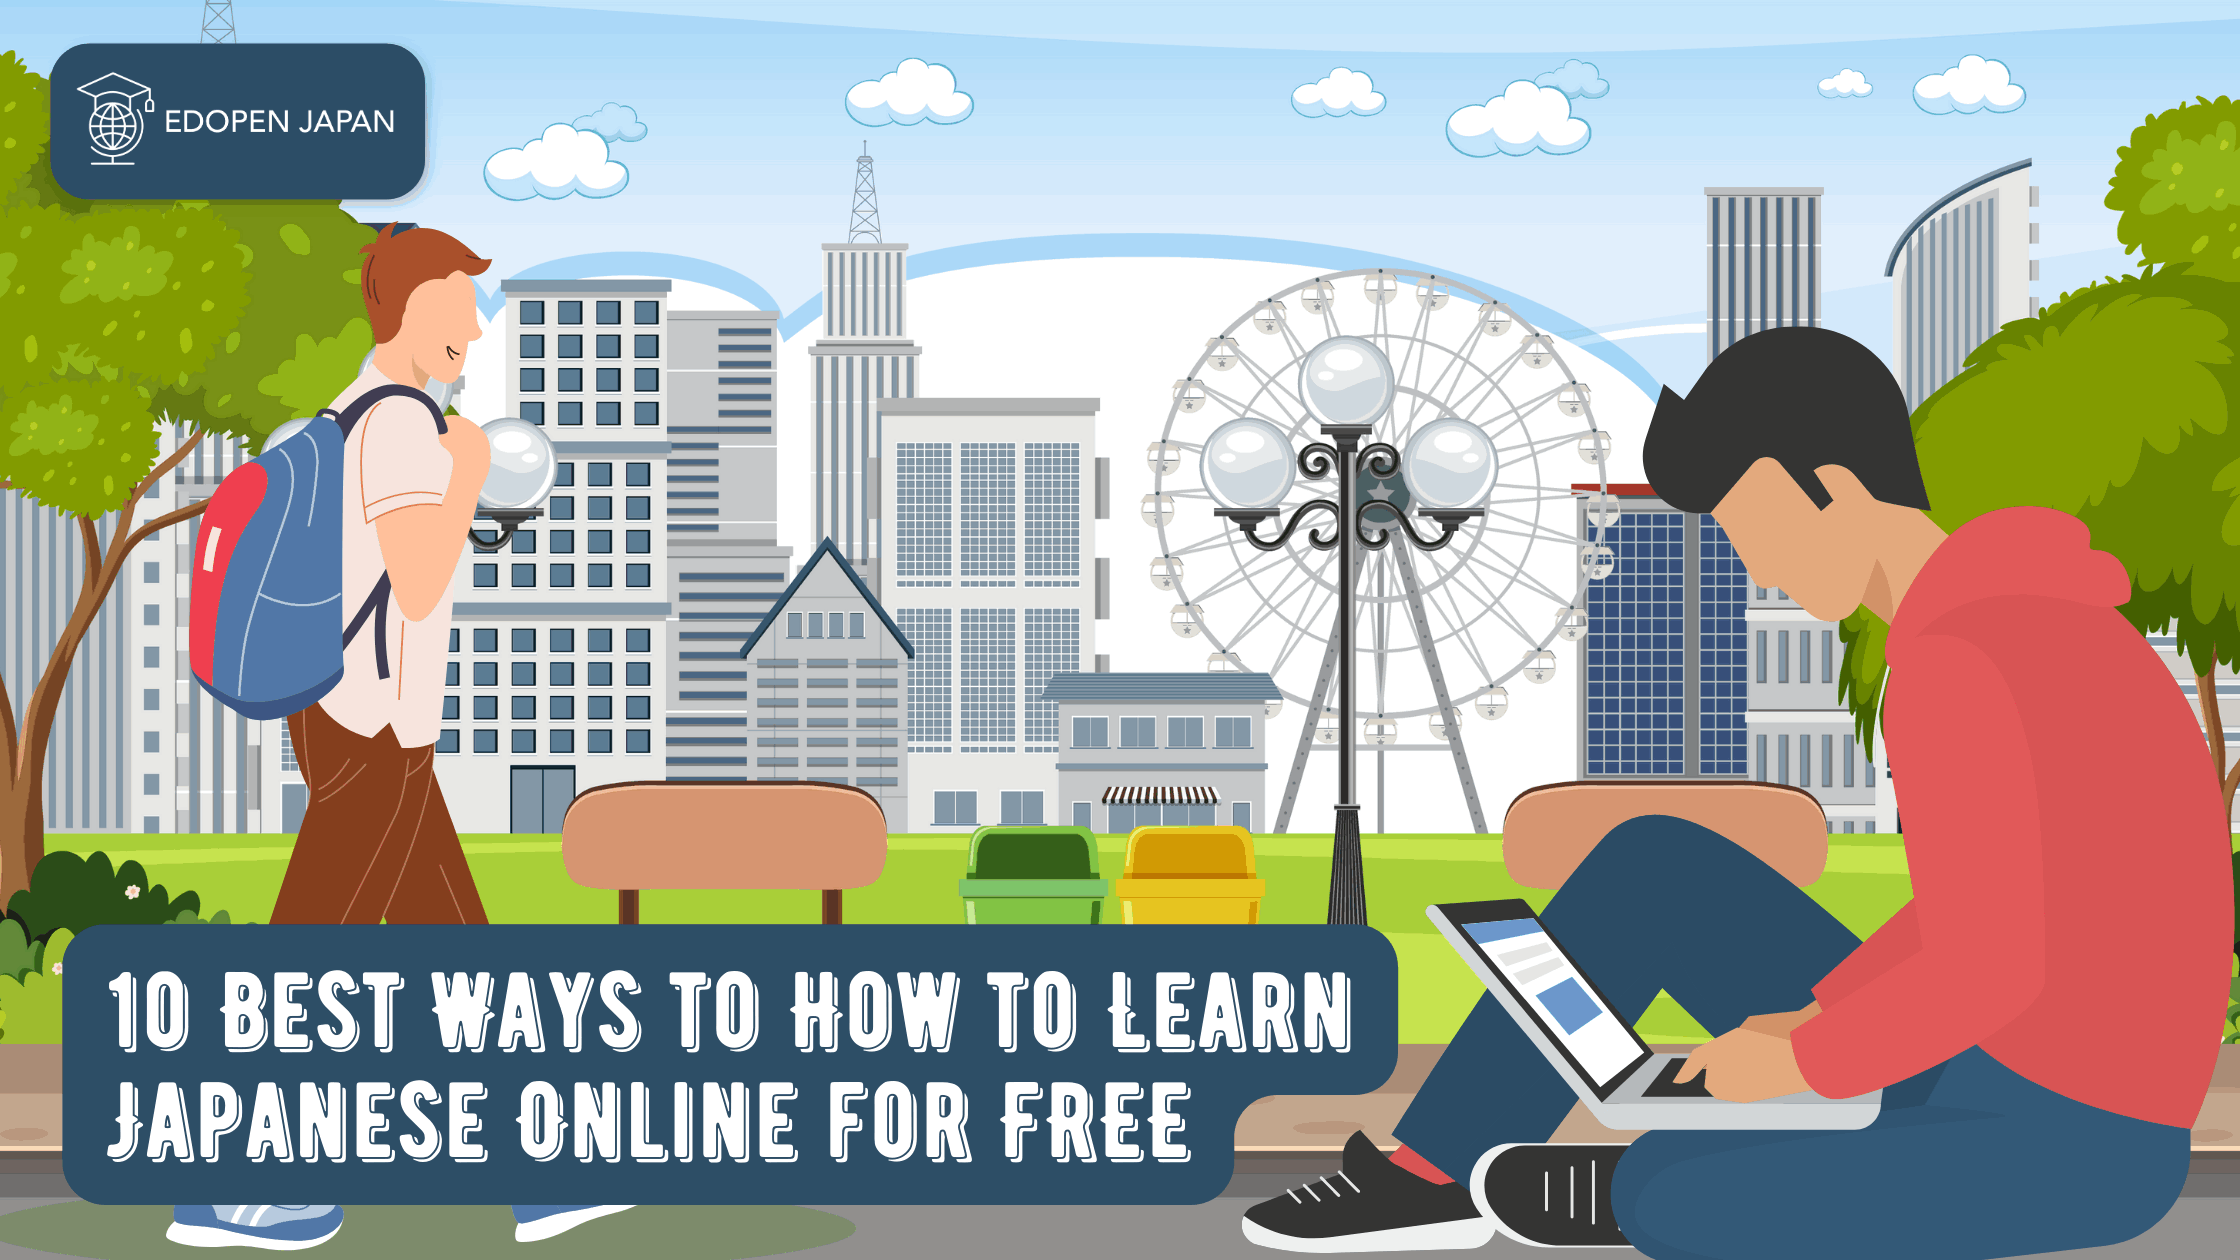 10 Best Ways to How to Learn Japanese Online for FREE - EDOPEN Japan